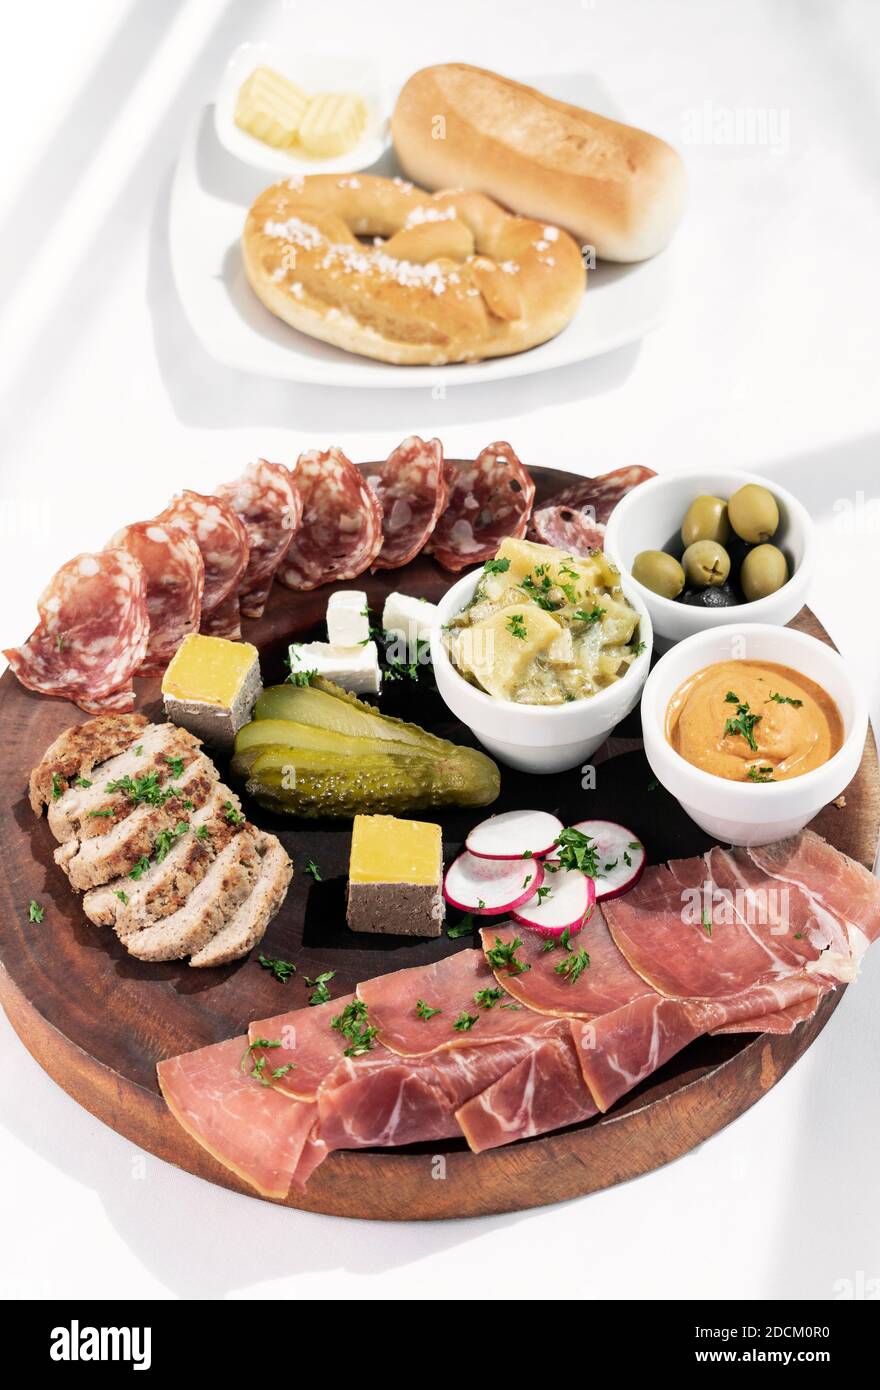 german cold cuts tapas snack platter with meats and bread on white background Stock Photo